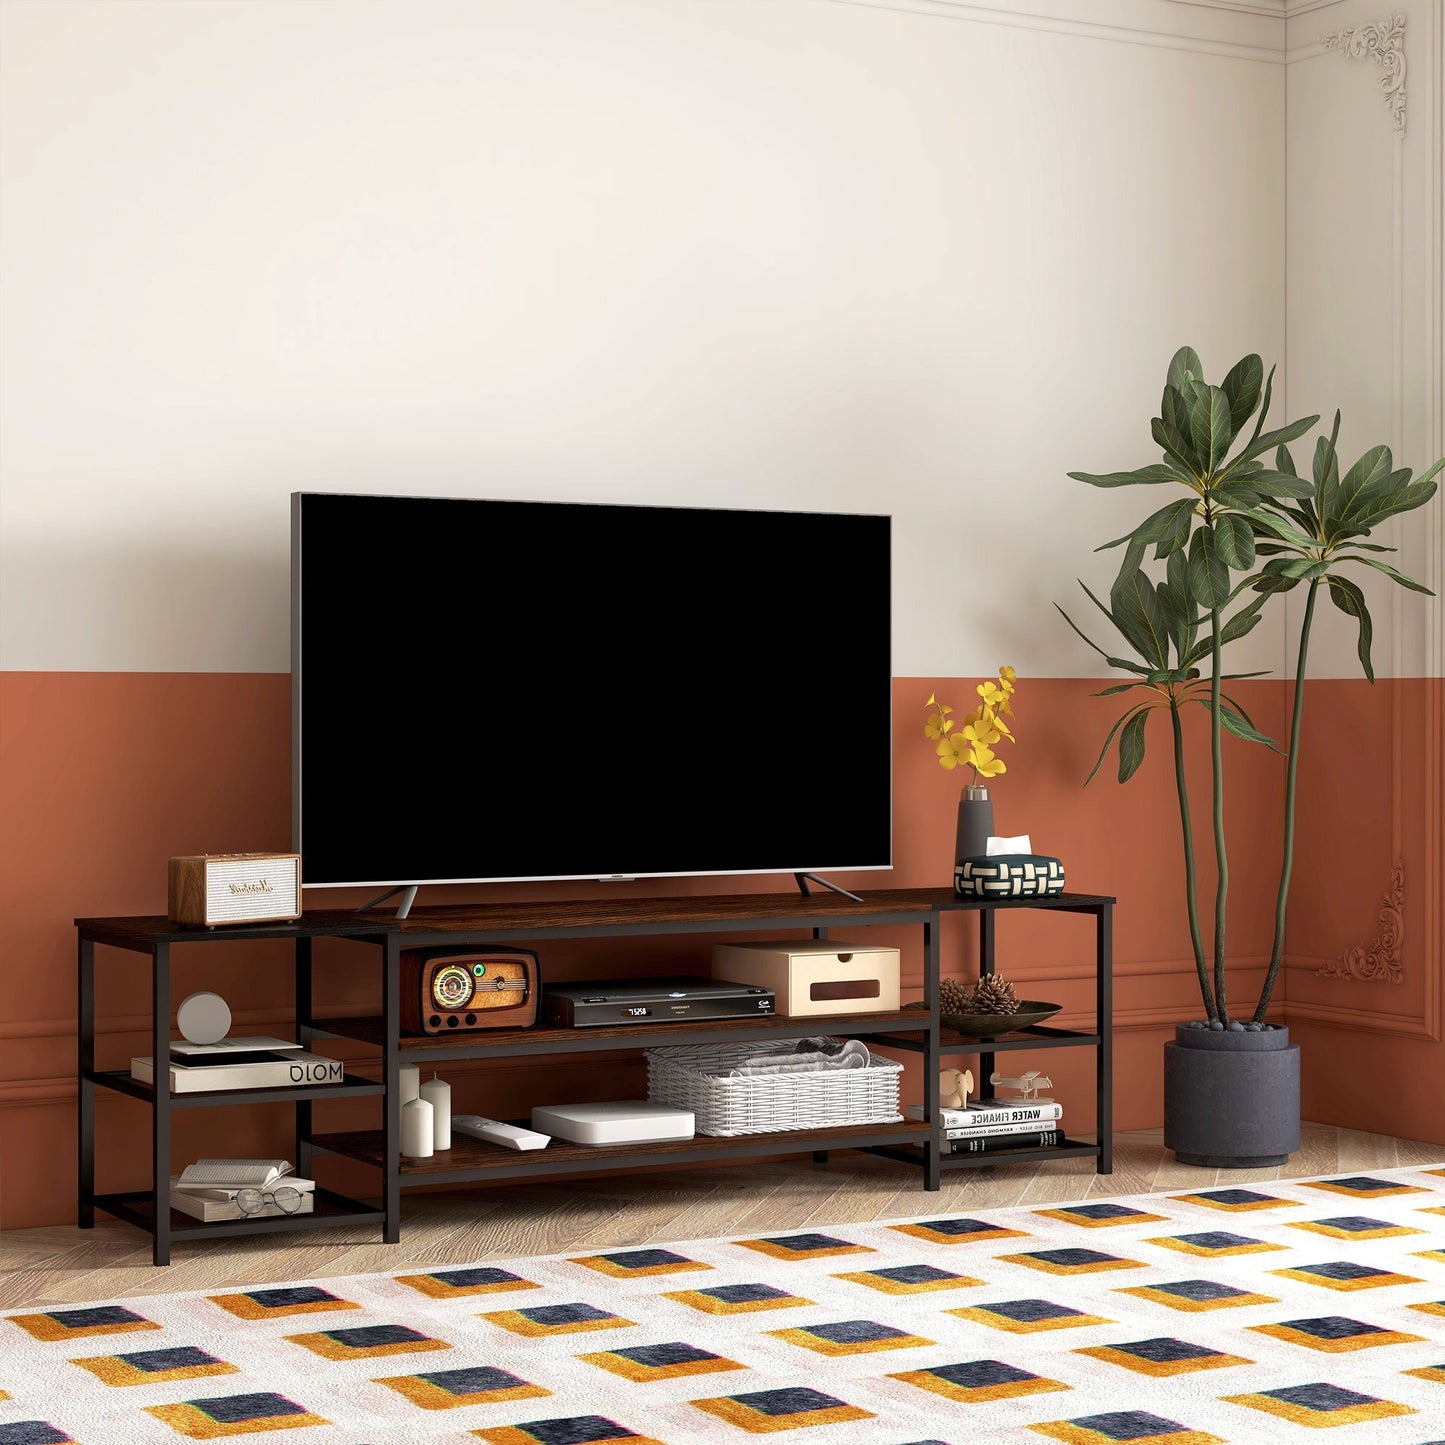 Industrial TV Cabinet, TV Stand for TVs Up to 80" with Storage Shelf and Steel Frame - Gallery Canada